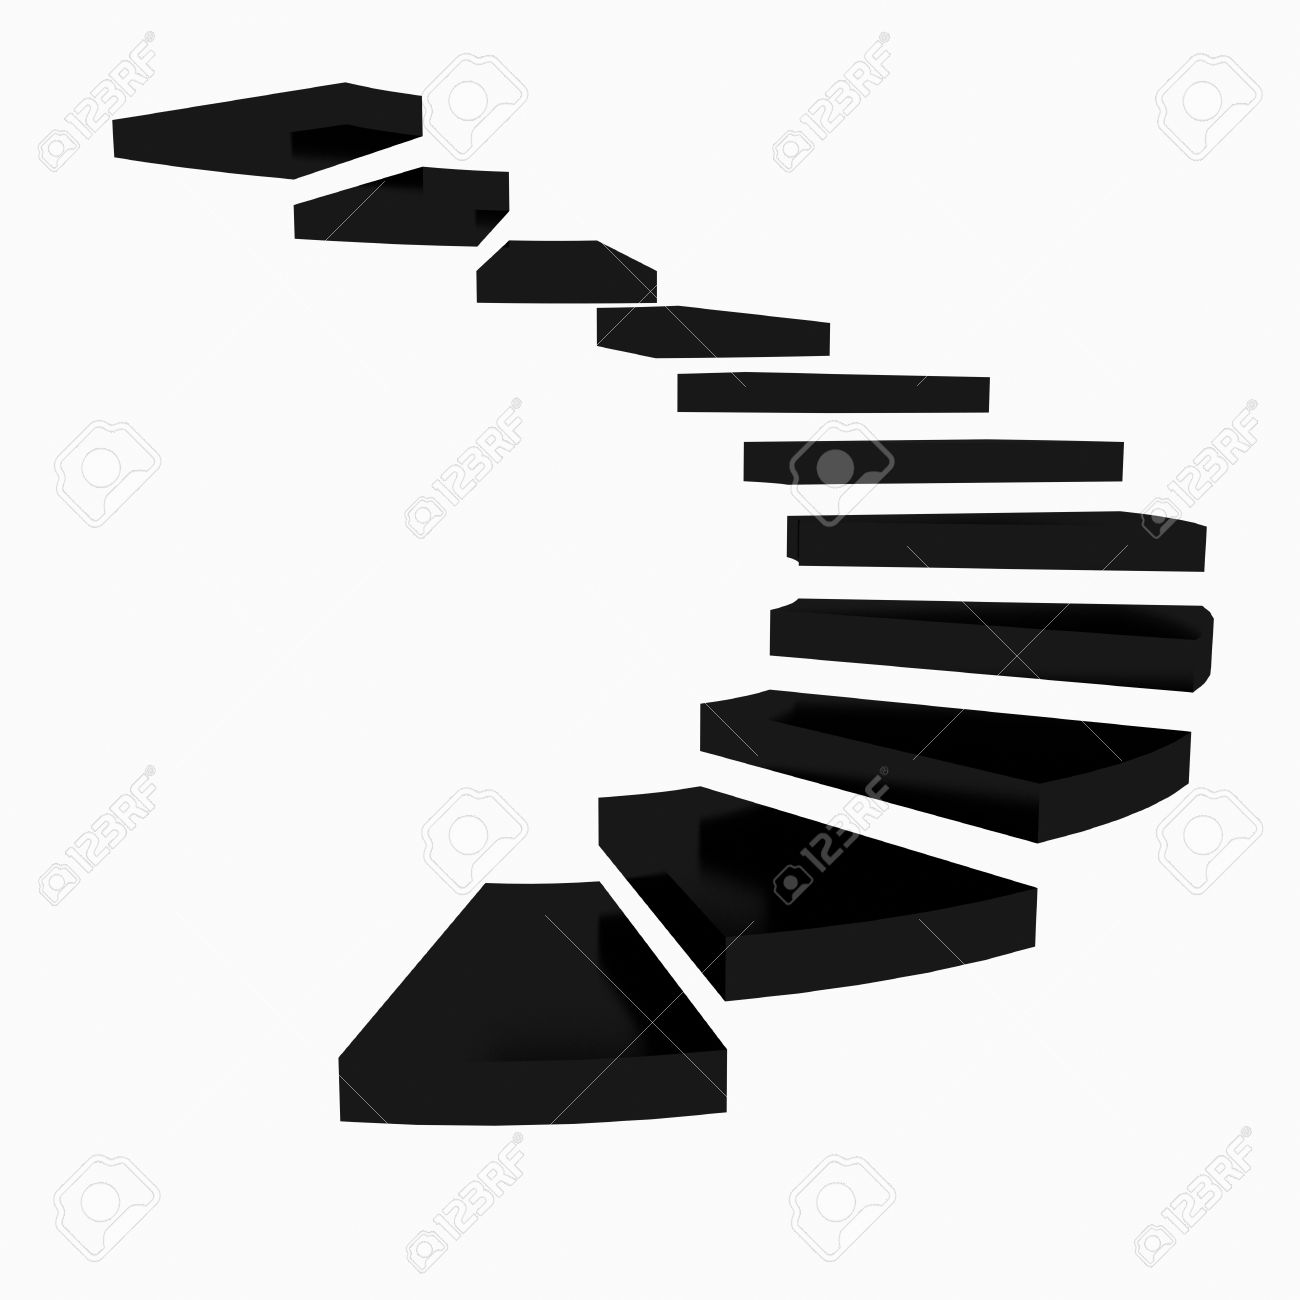 Spiral staircase clipart